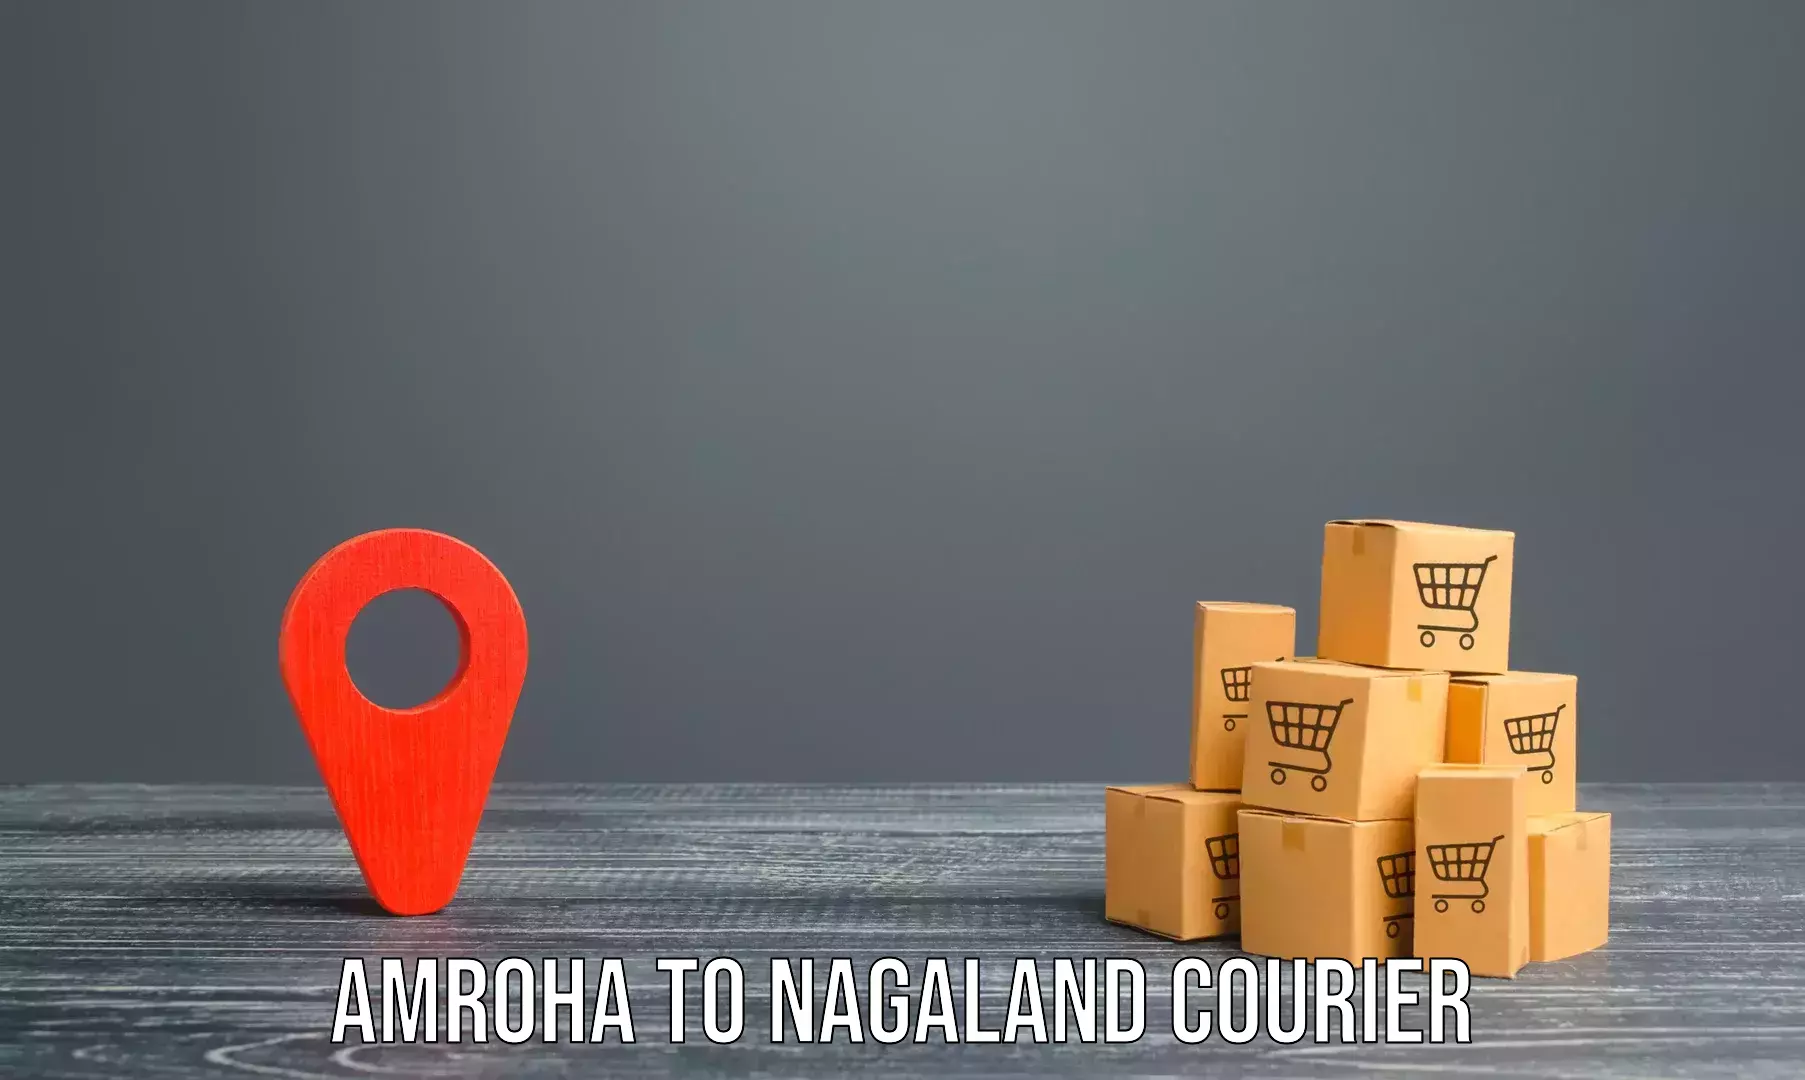 Furniture relocation experts Amroha to Nagaland